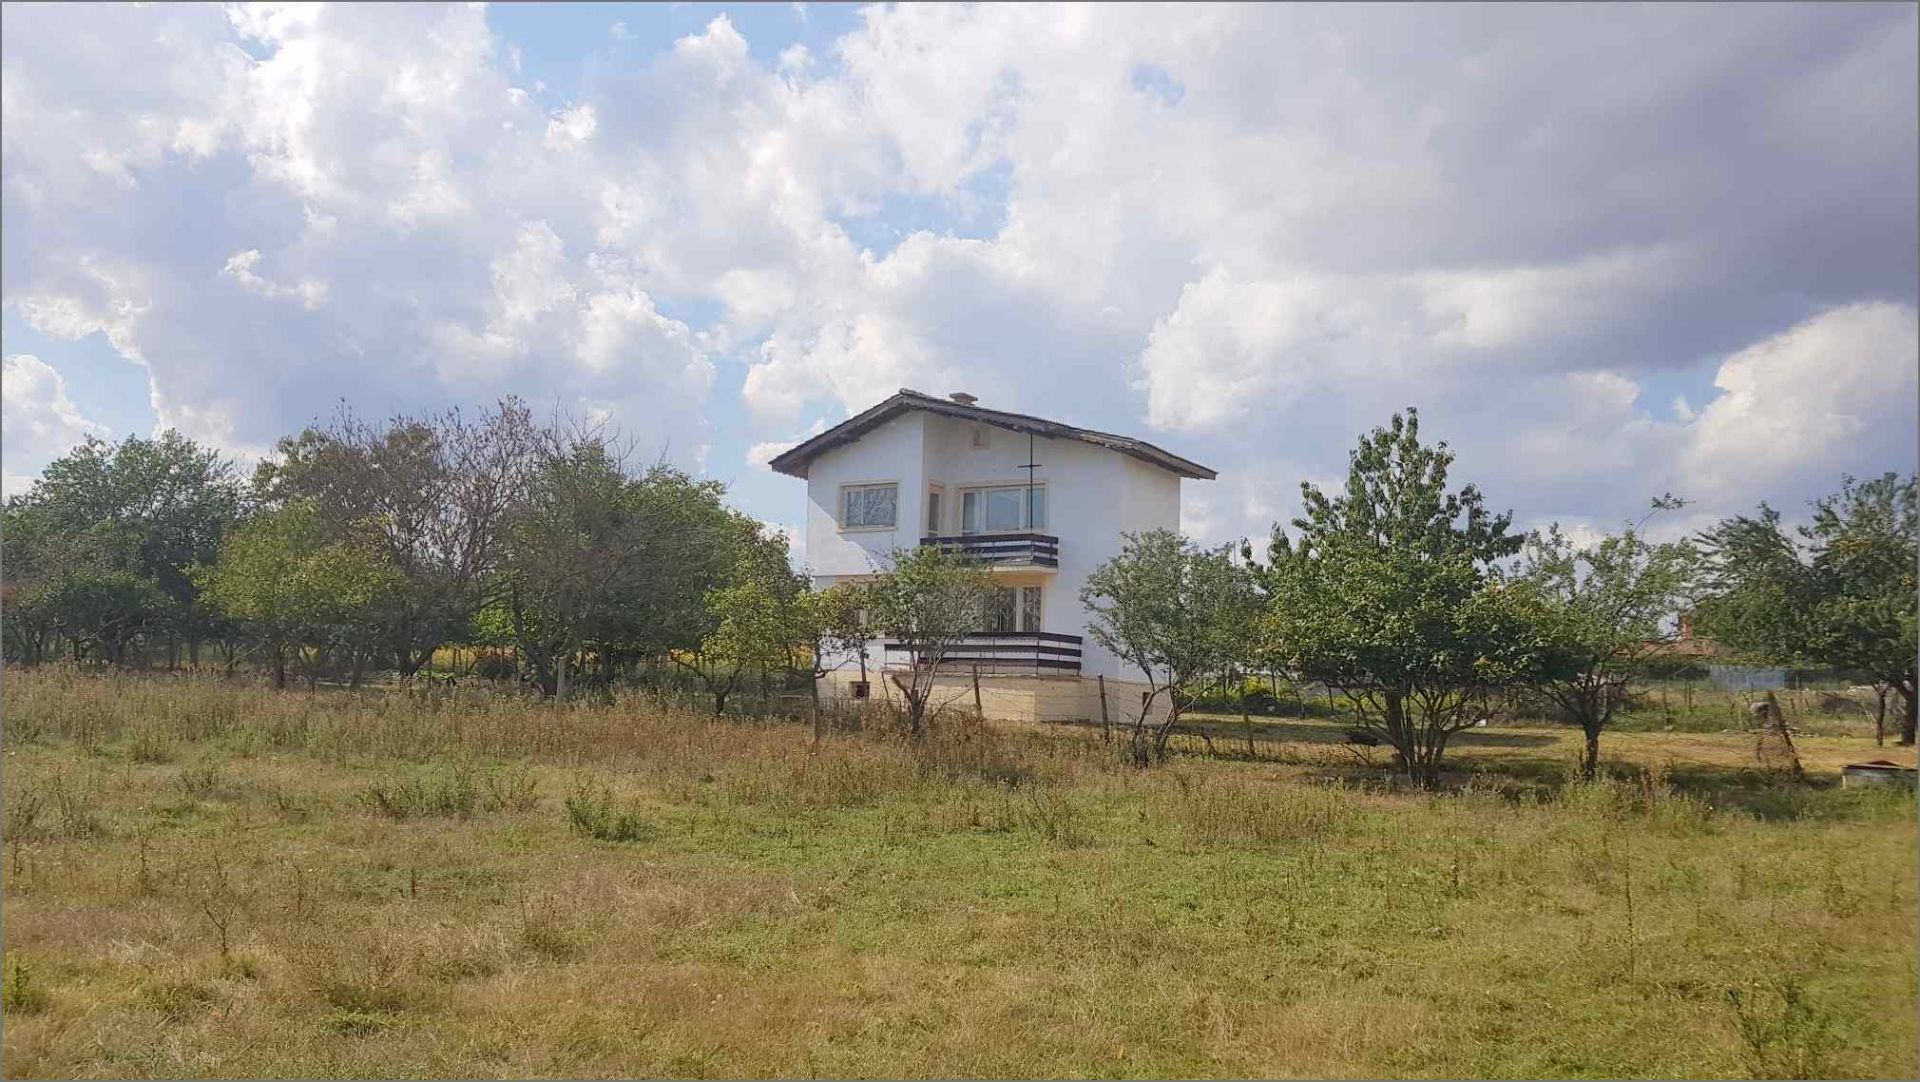 FOUR BEDROOM VILLA AND 950 SQM OF LAND NEAR THE COAST IN MALINA, BULGARIA - Image 3 of 25